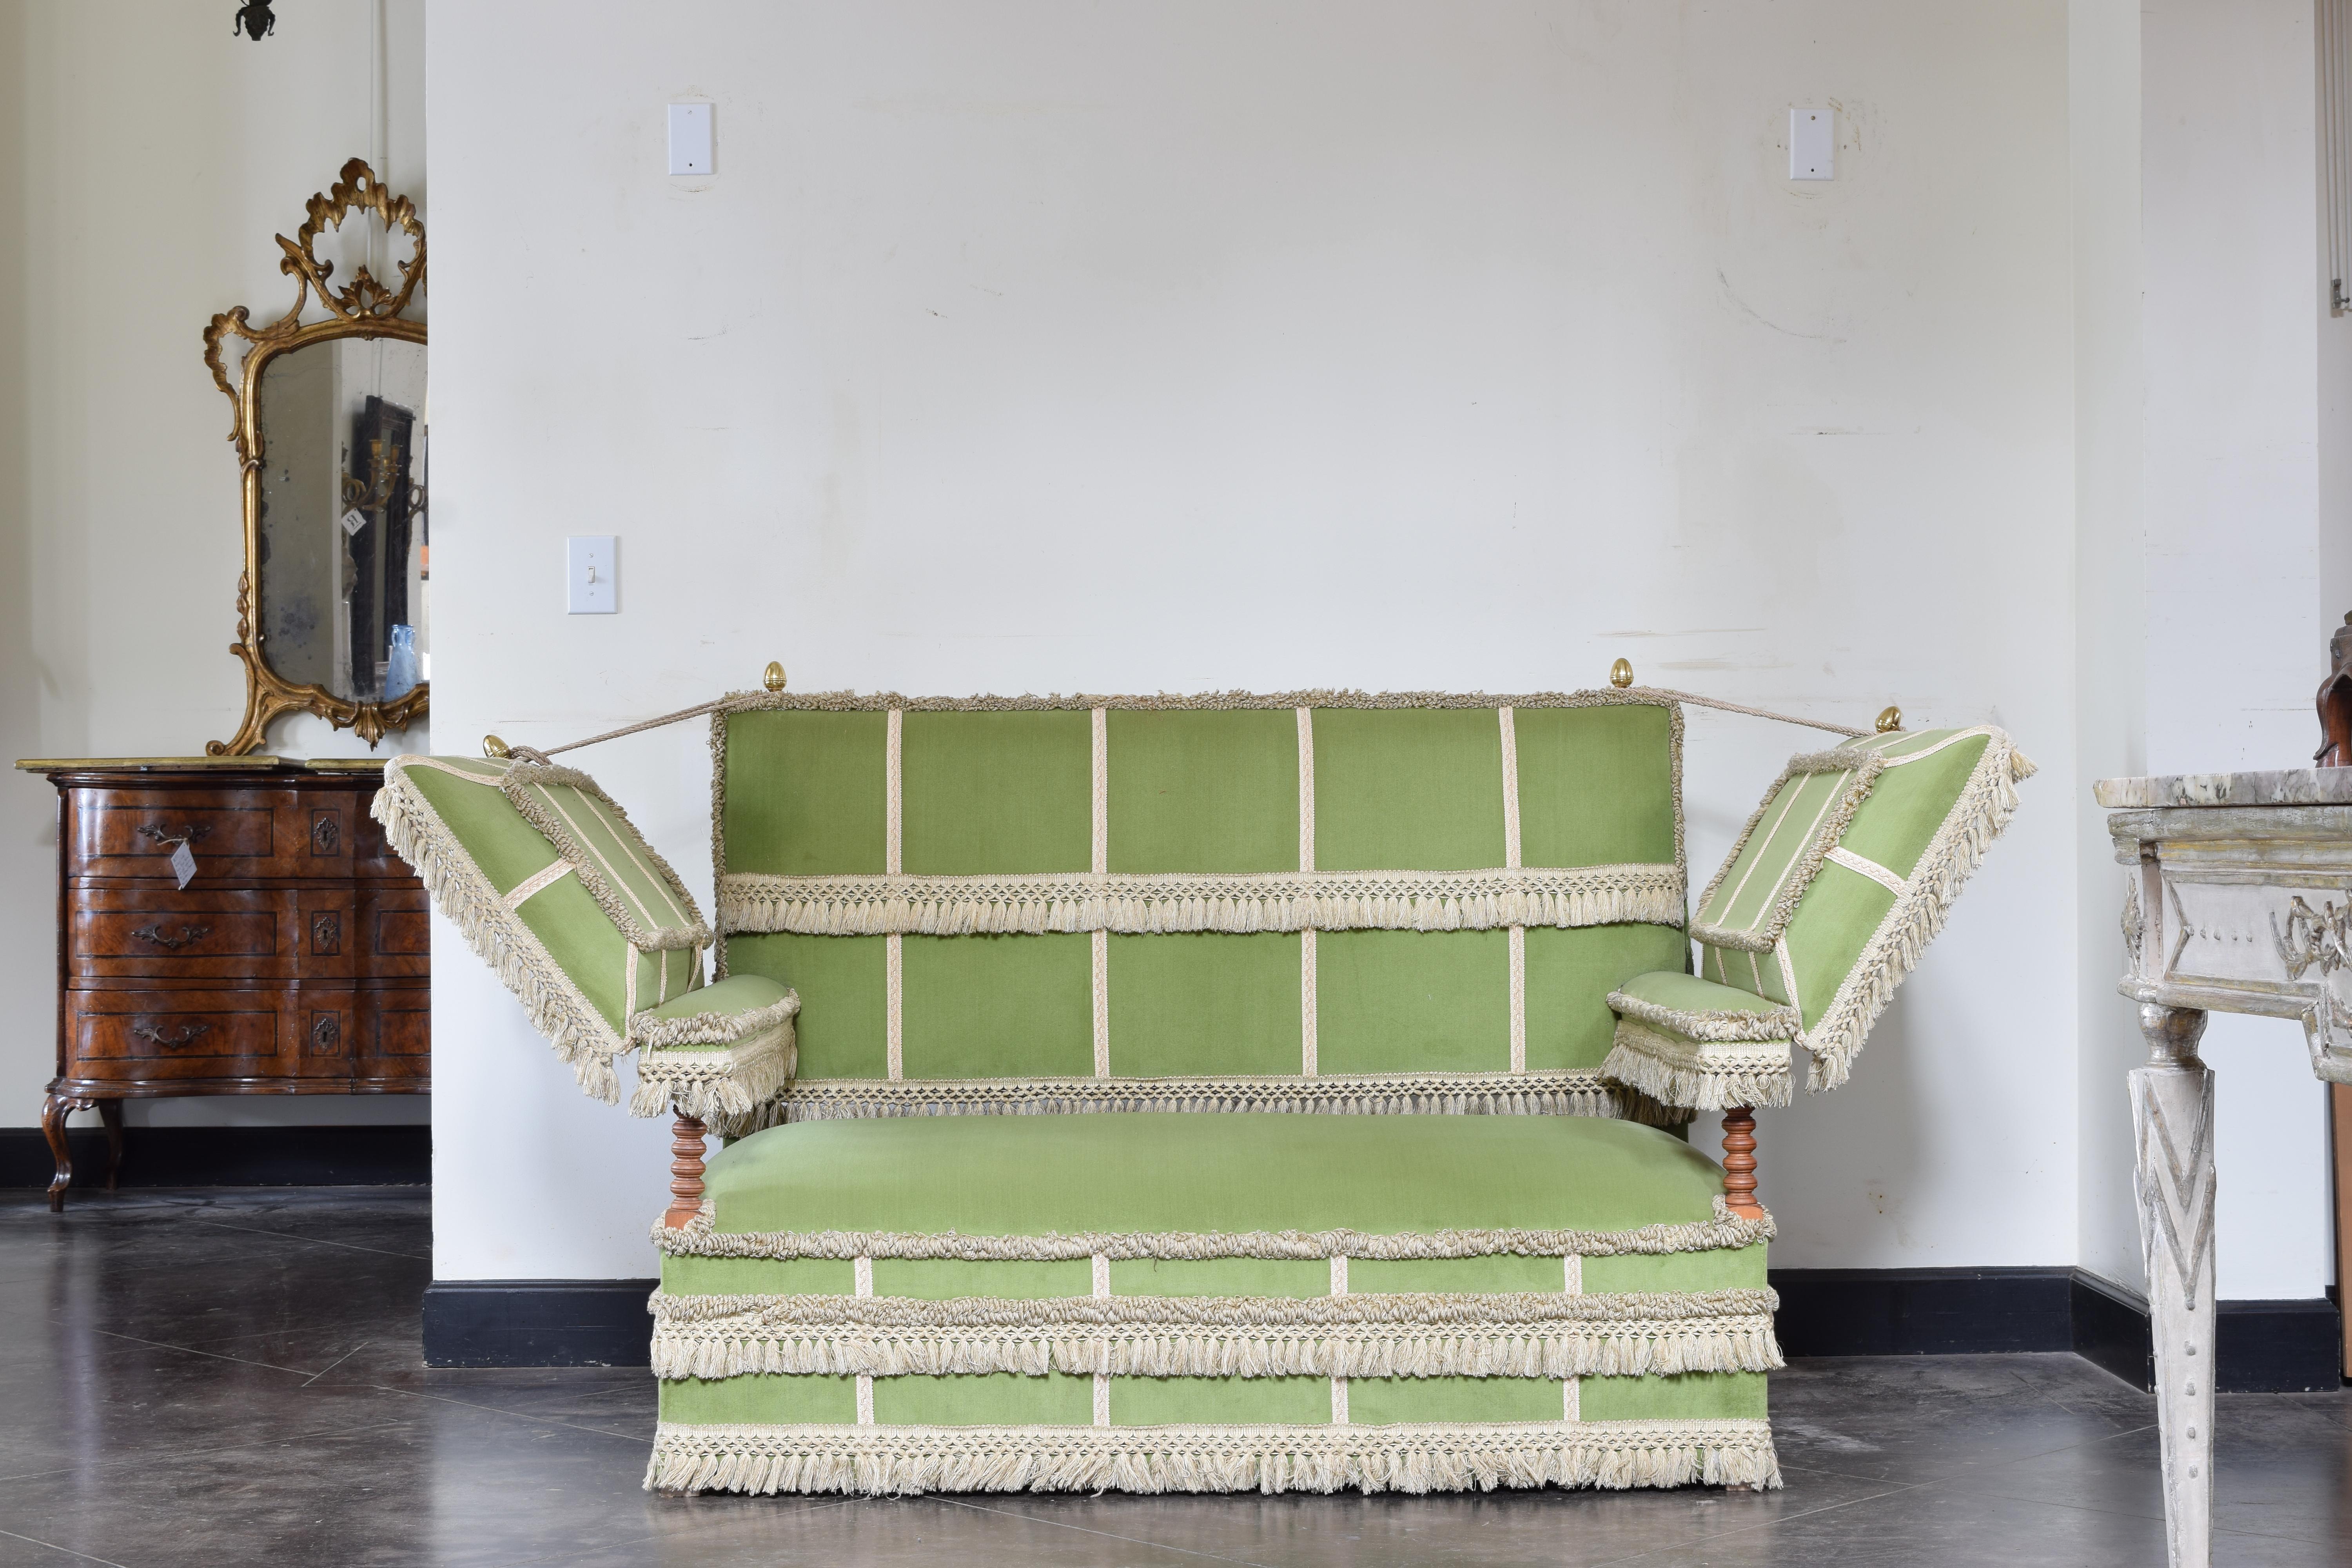 Upholstered in green velvet with applied embroidered tape/trim with matching braid and fringe, adjustable padded wings controlled by roping.

The original Knole Settee (also known as the Knole Sofa) is a couch chair that was made in the 17th